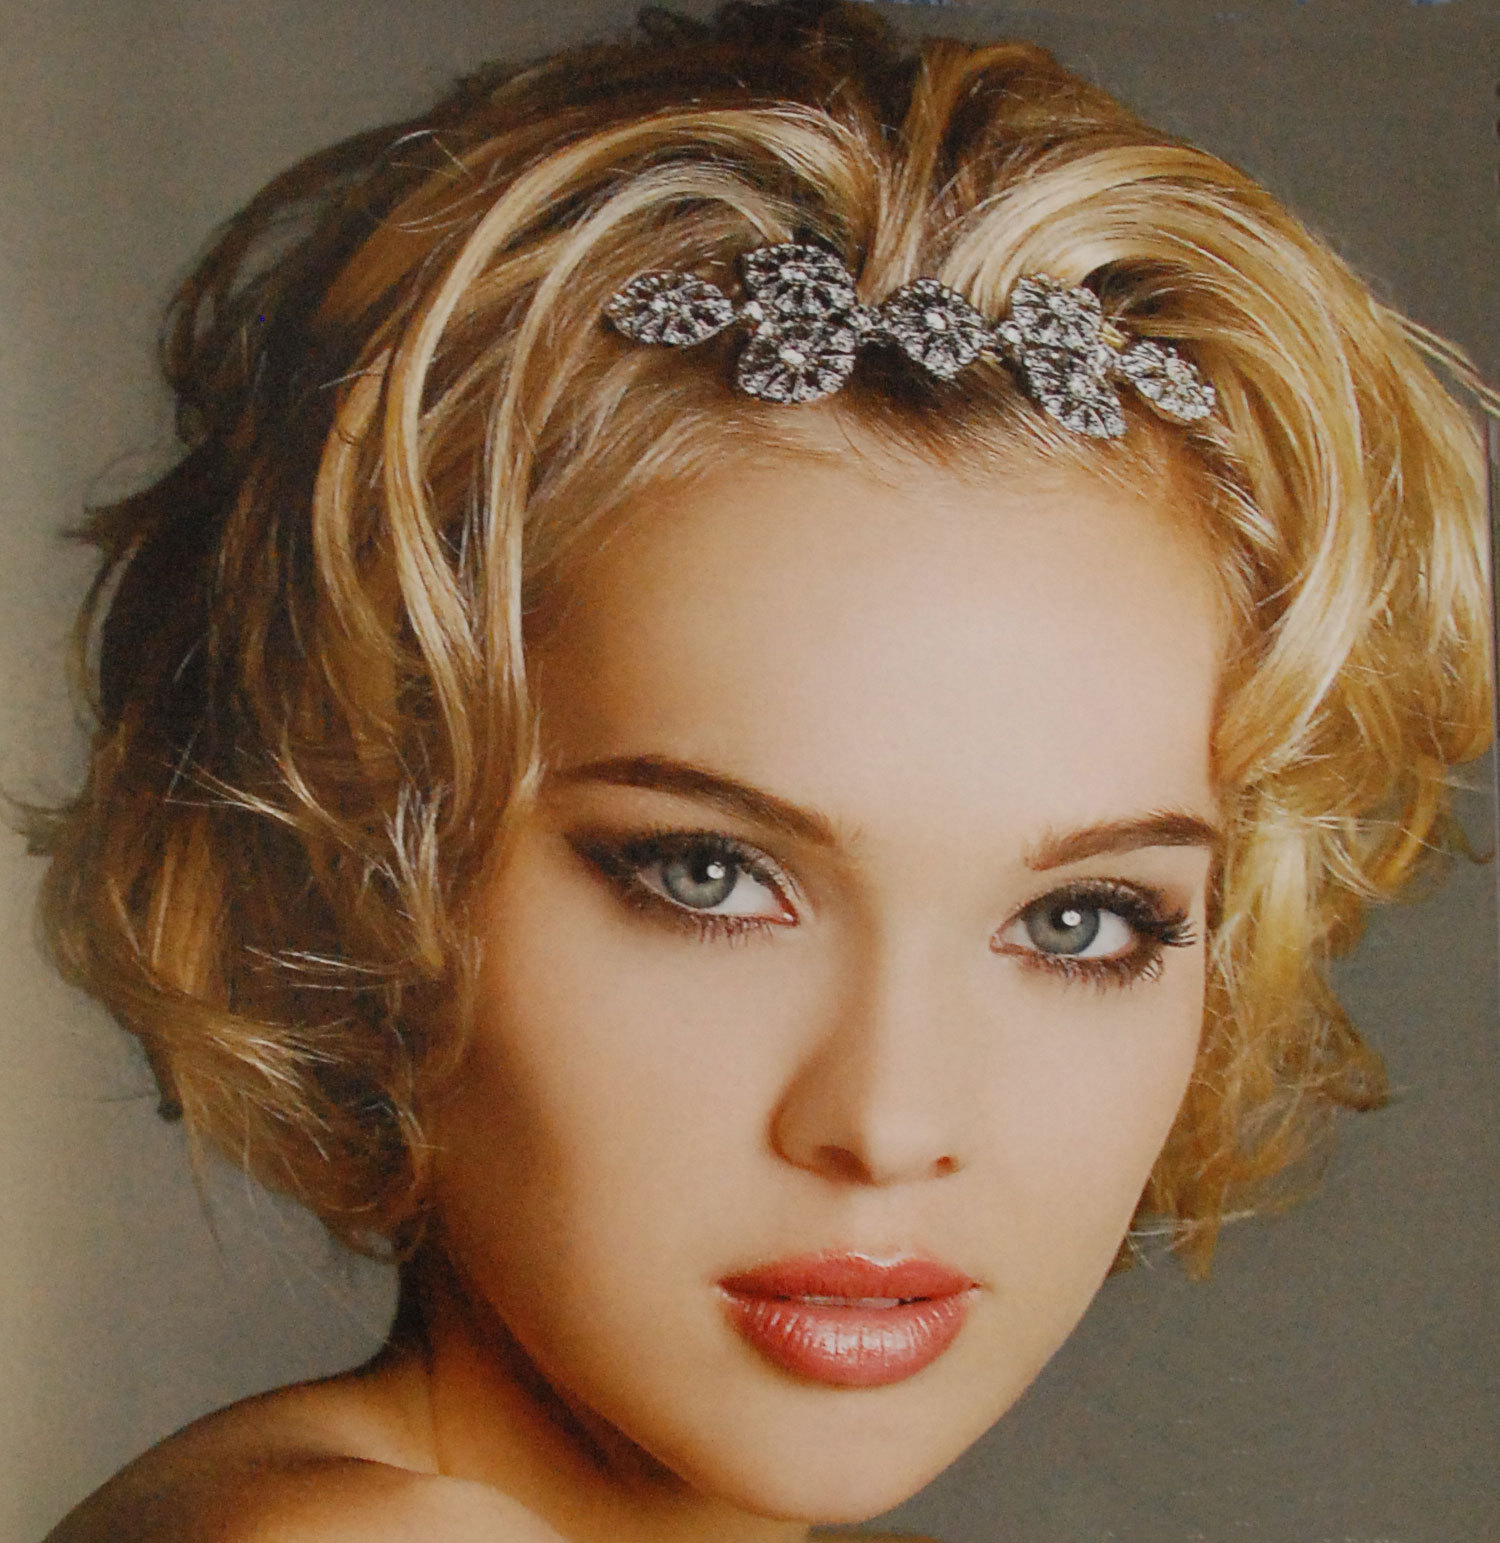 Hairstyles for Short Hair | Wedding Style Guide